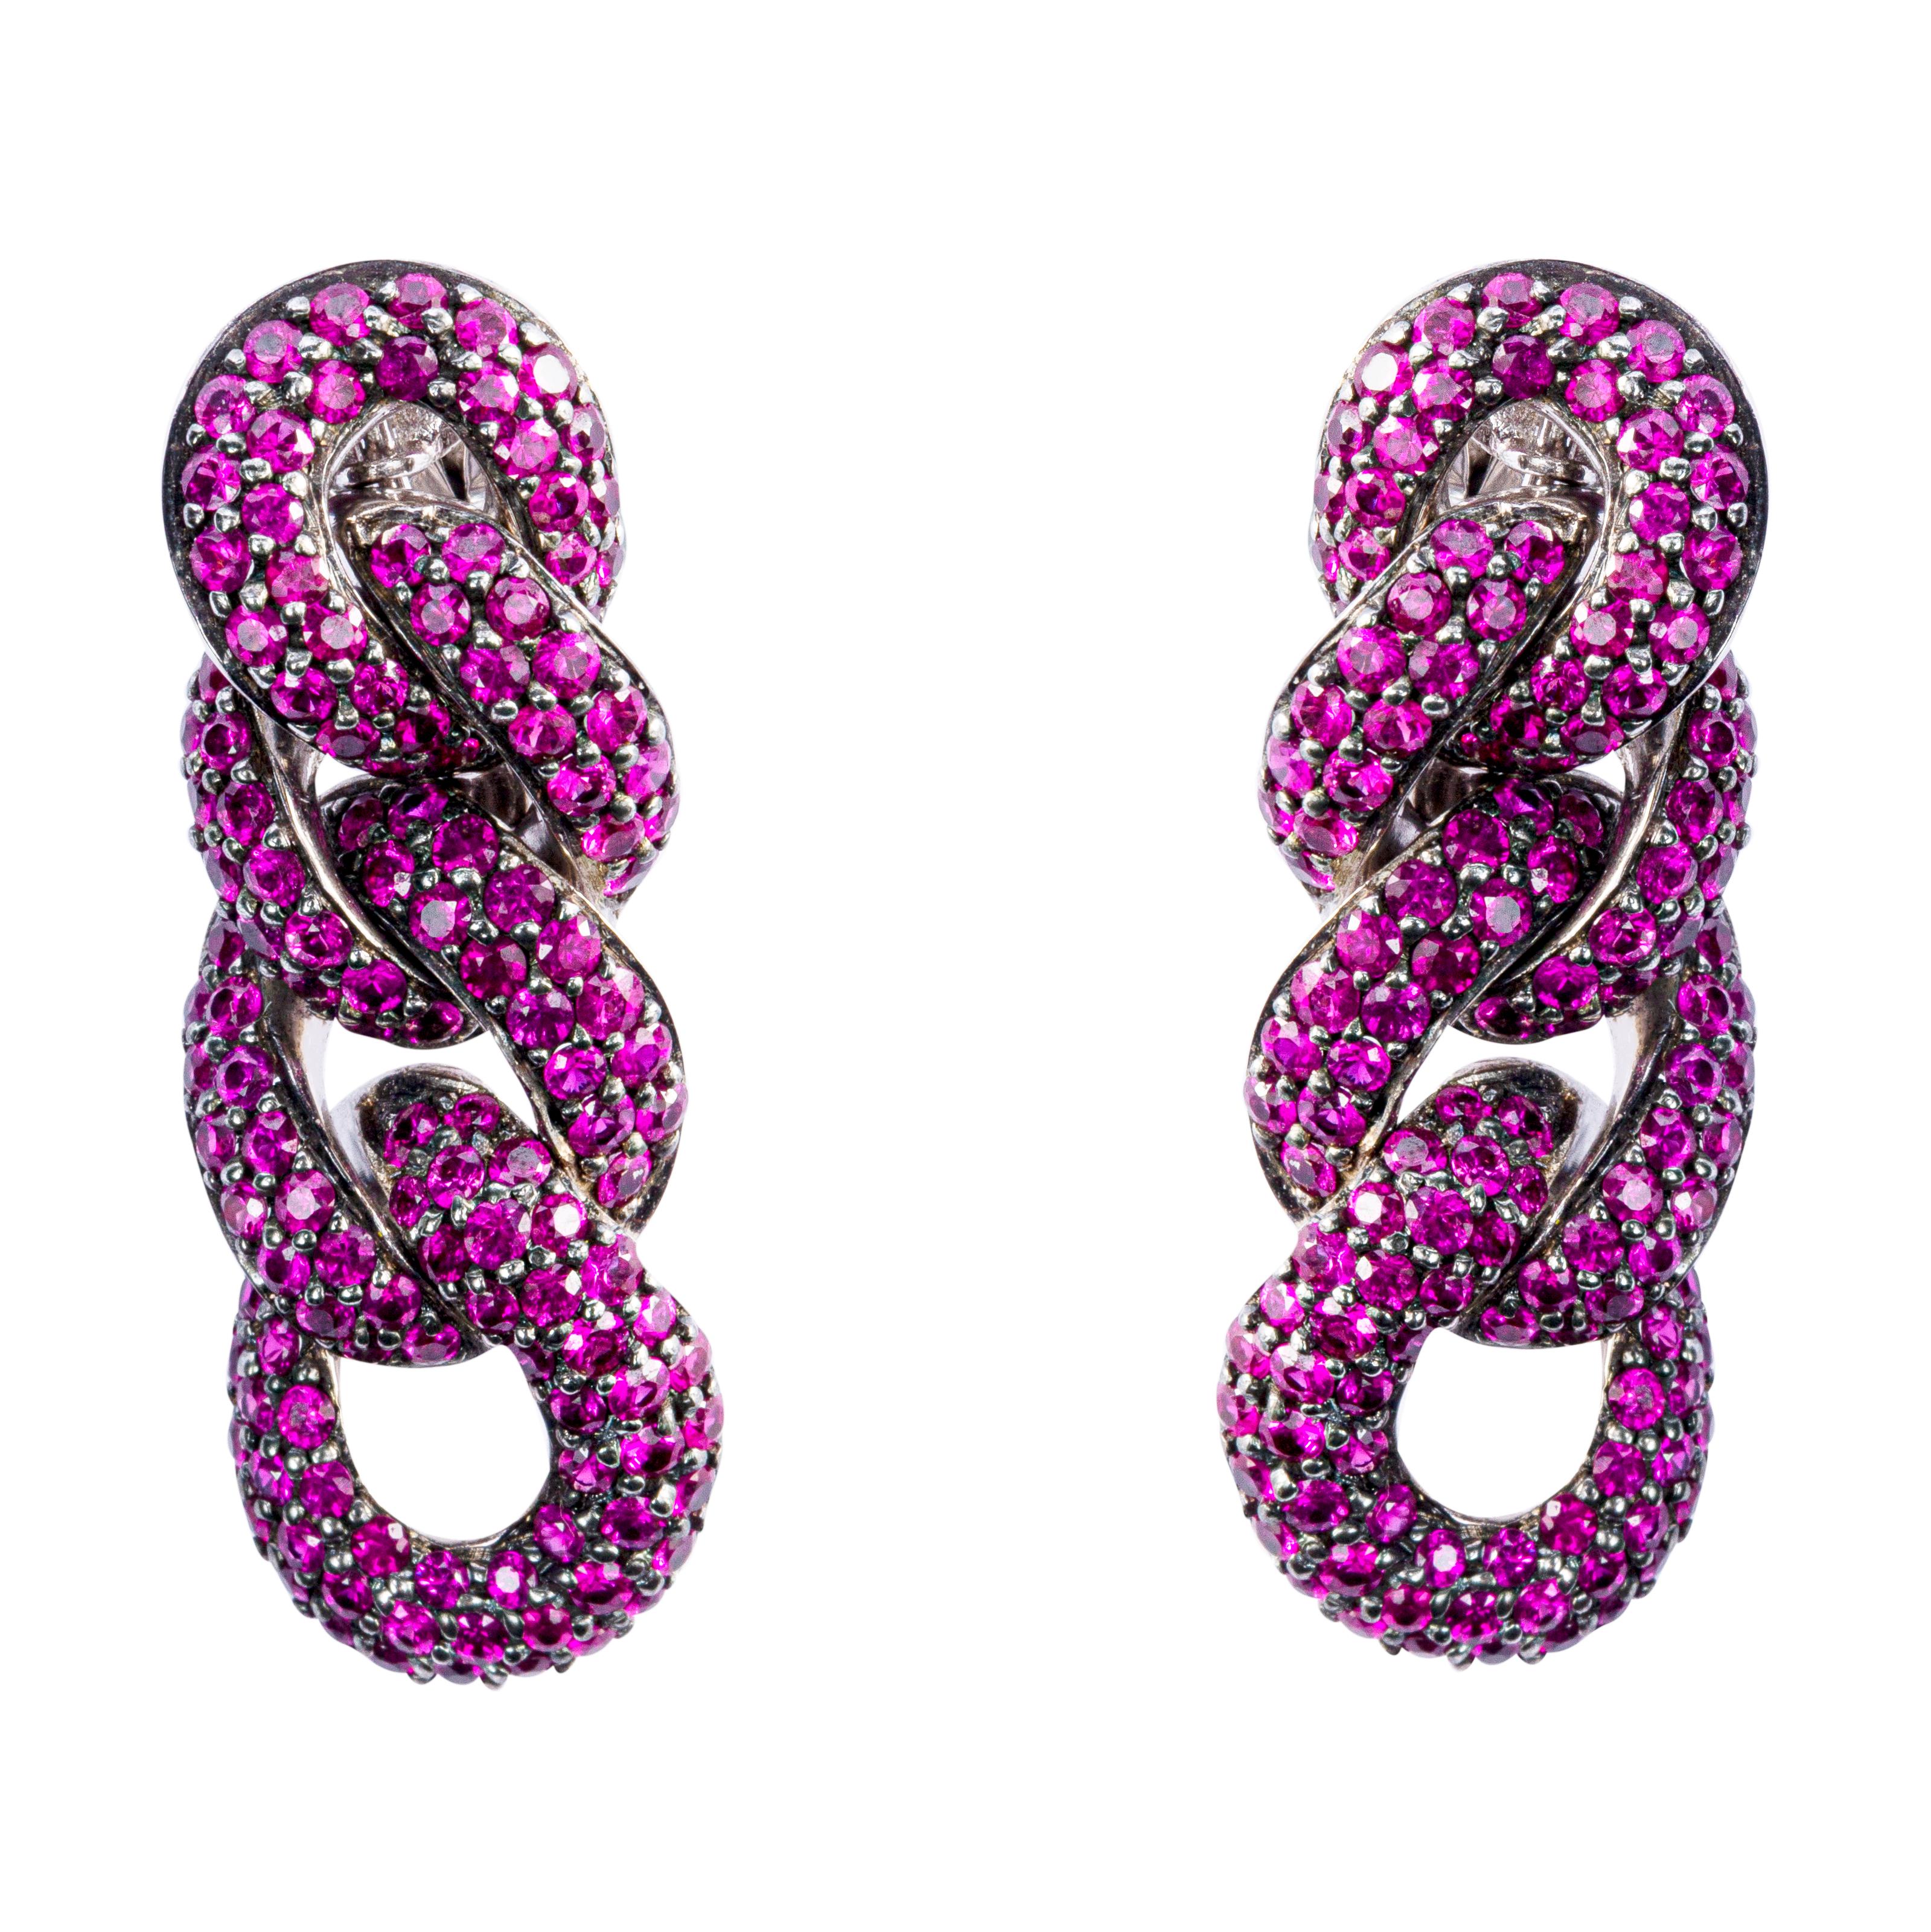 Alex Jona design collection, hand crafted in Italy, 18k white gold curb link chain clip earrings set with 4.58 carats of rubies with black rhodium setting. 
Dimensions: H x 34mm, W x 12mm, D x 5mm / H x 1.33in, W x 0.47in, D x 0.19in.
All Jona